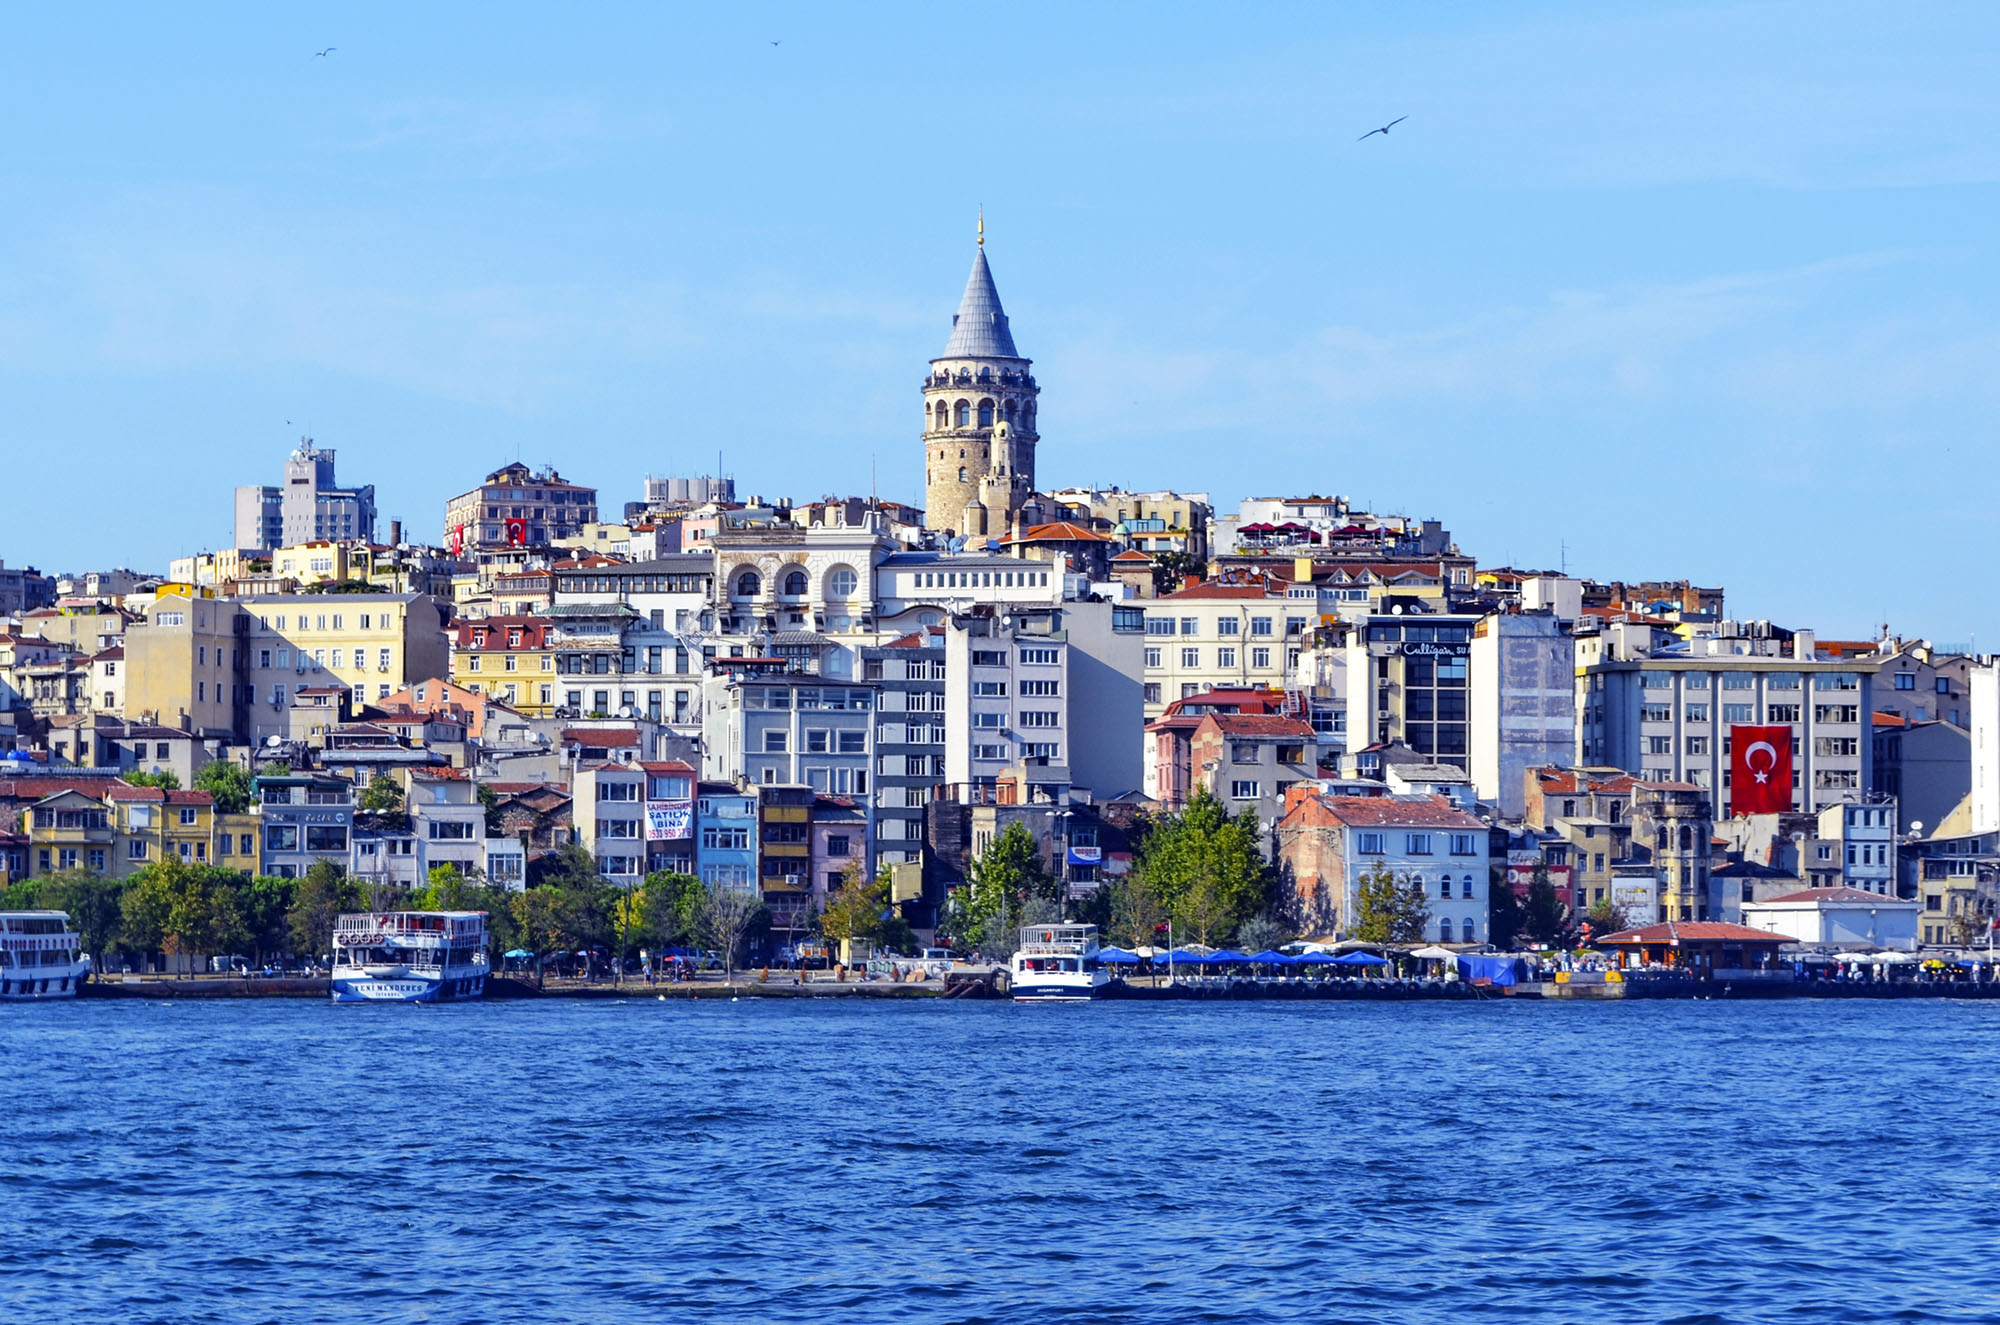 The Bosporus, normally cobalt blue, went electric turquoise 